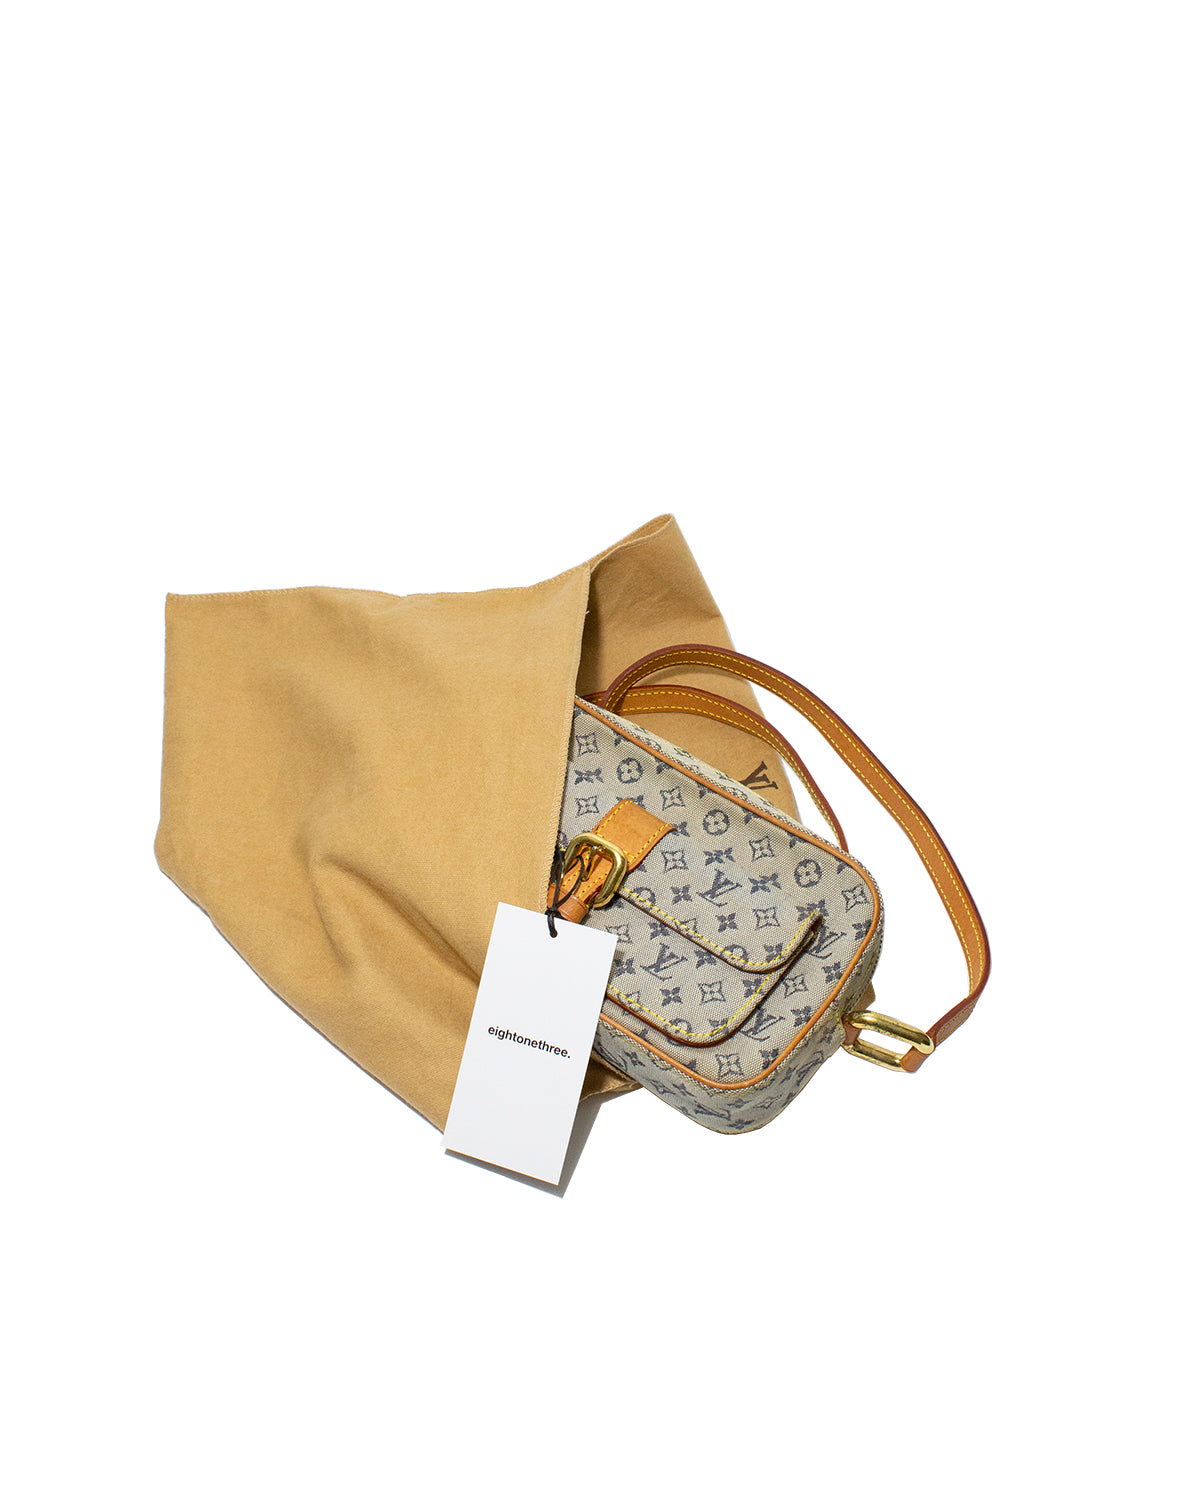 EOW - 💦NEW ARRIVAL💦 Louis Vuitton Mini lin Juliette crossbody bag for  $675!!!! - - - - AFFIRM NOW AVAILABLE - Get any of my bags on payment plan.  Visit my website